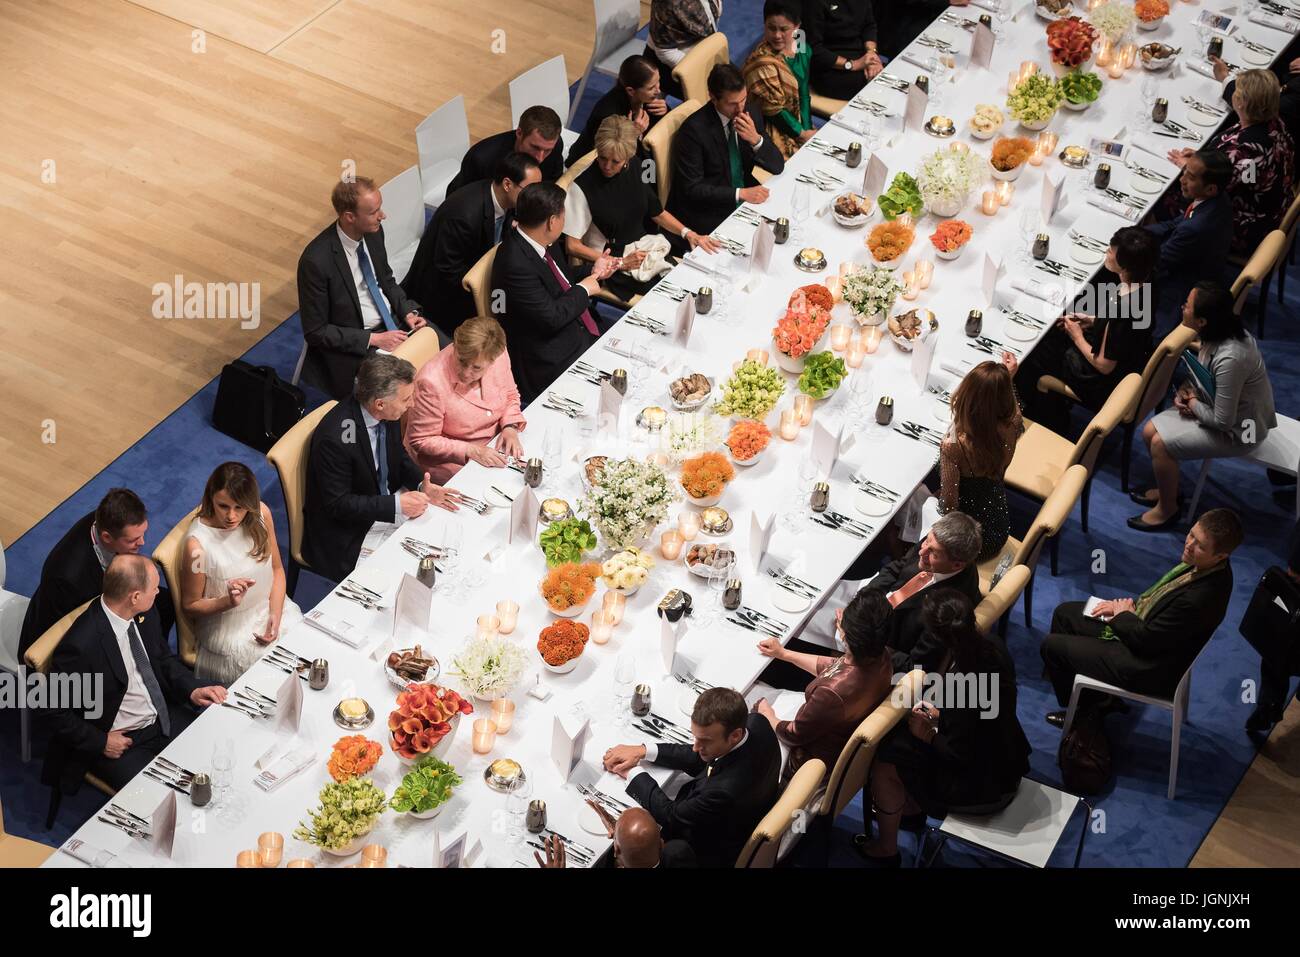 German Chancellor Angela Merkel hosts a dinner for world leaders attending the first day of the G20 Summit meeting at the Elbphilharmonie concert hall July 7, 2017 in Hamburg, Germany.   (Bundesregierung/Kugler via Planetpix) Stock Photo